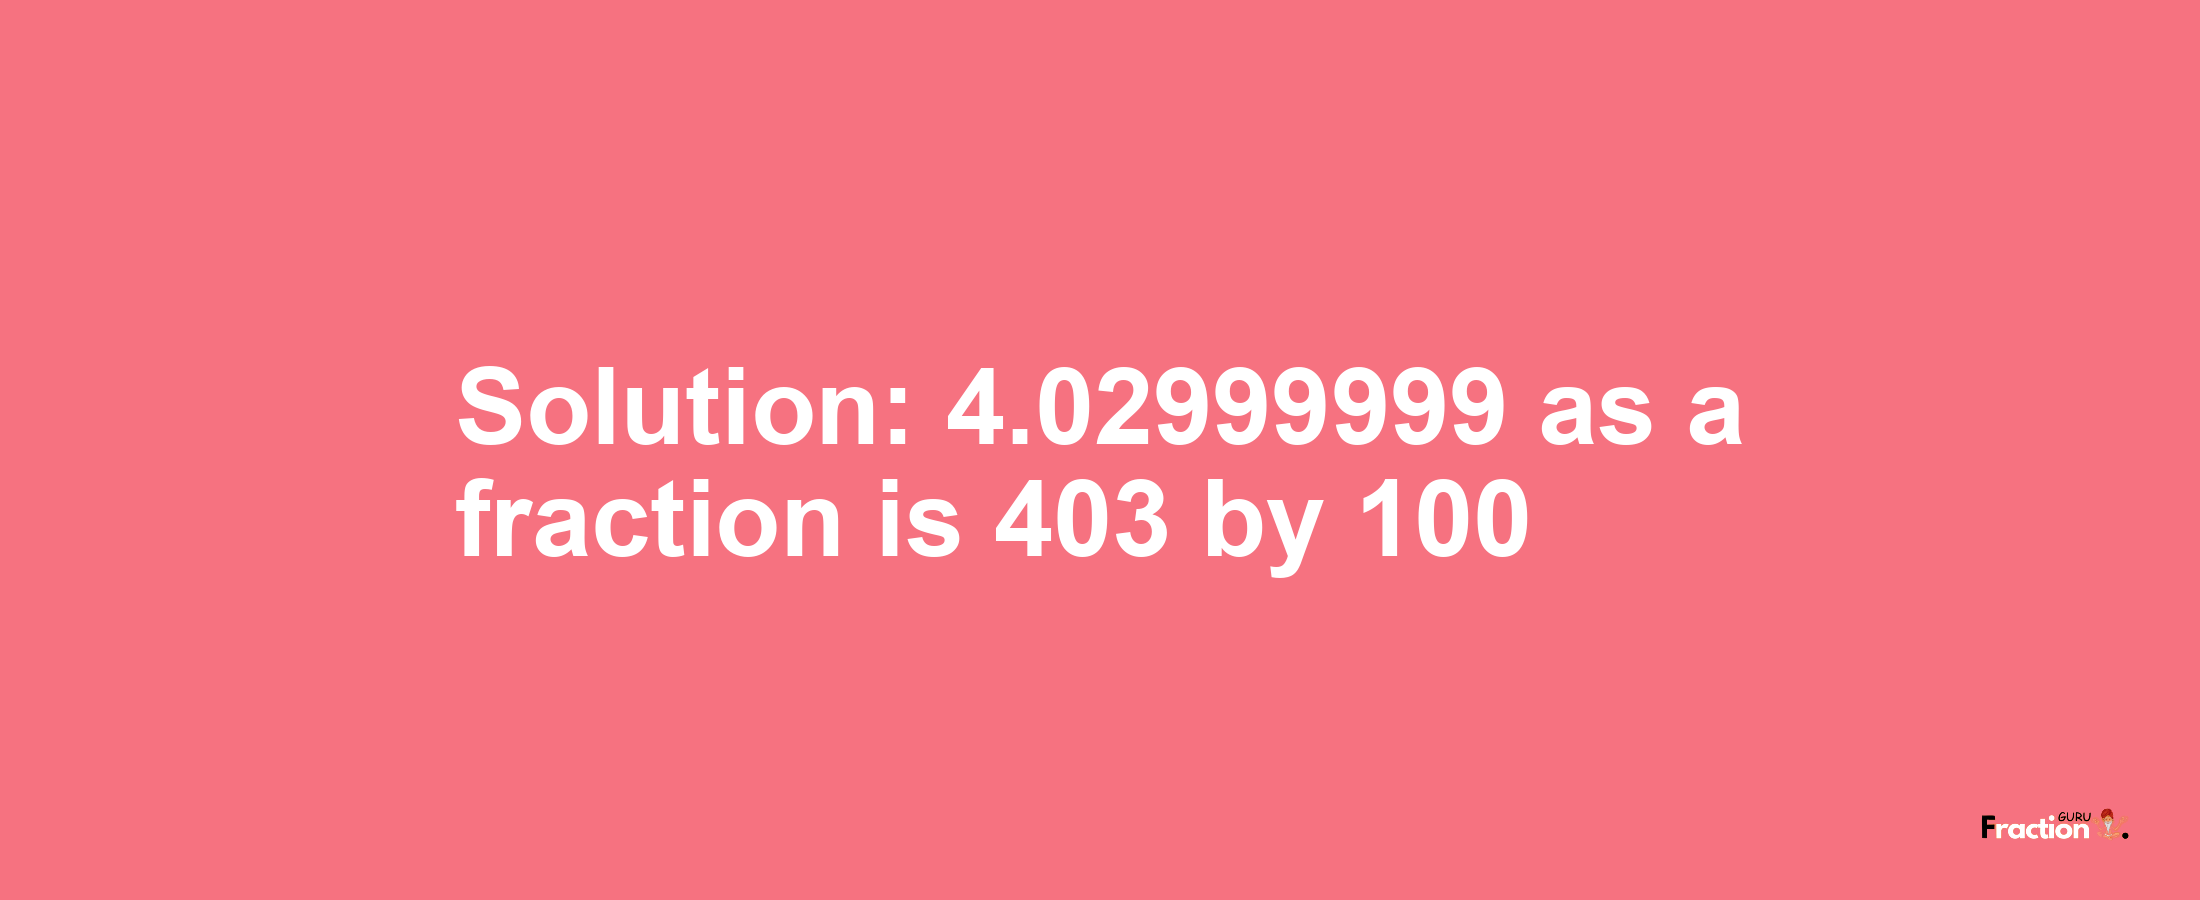 Solution:4.02999999 as a fraction is 403/100